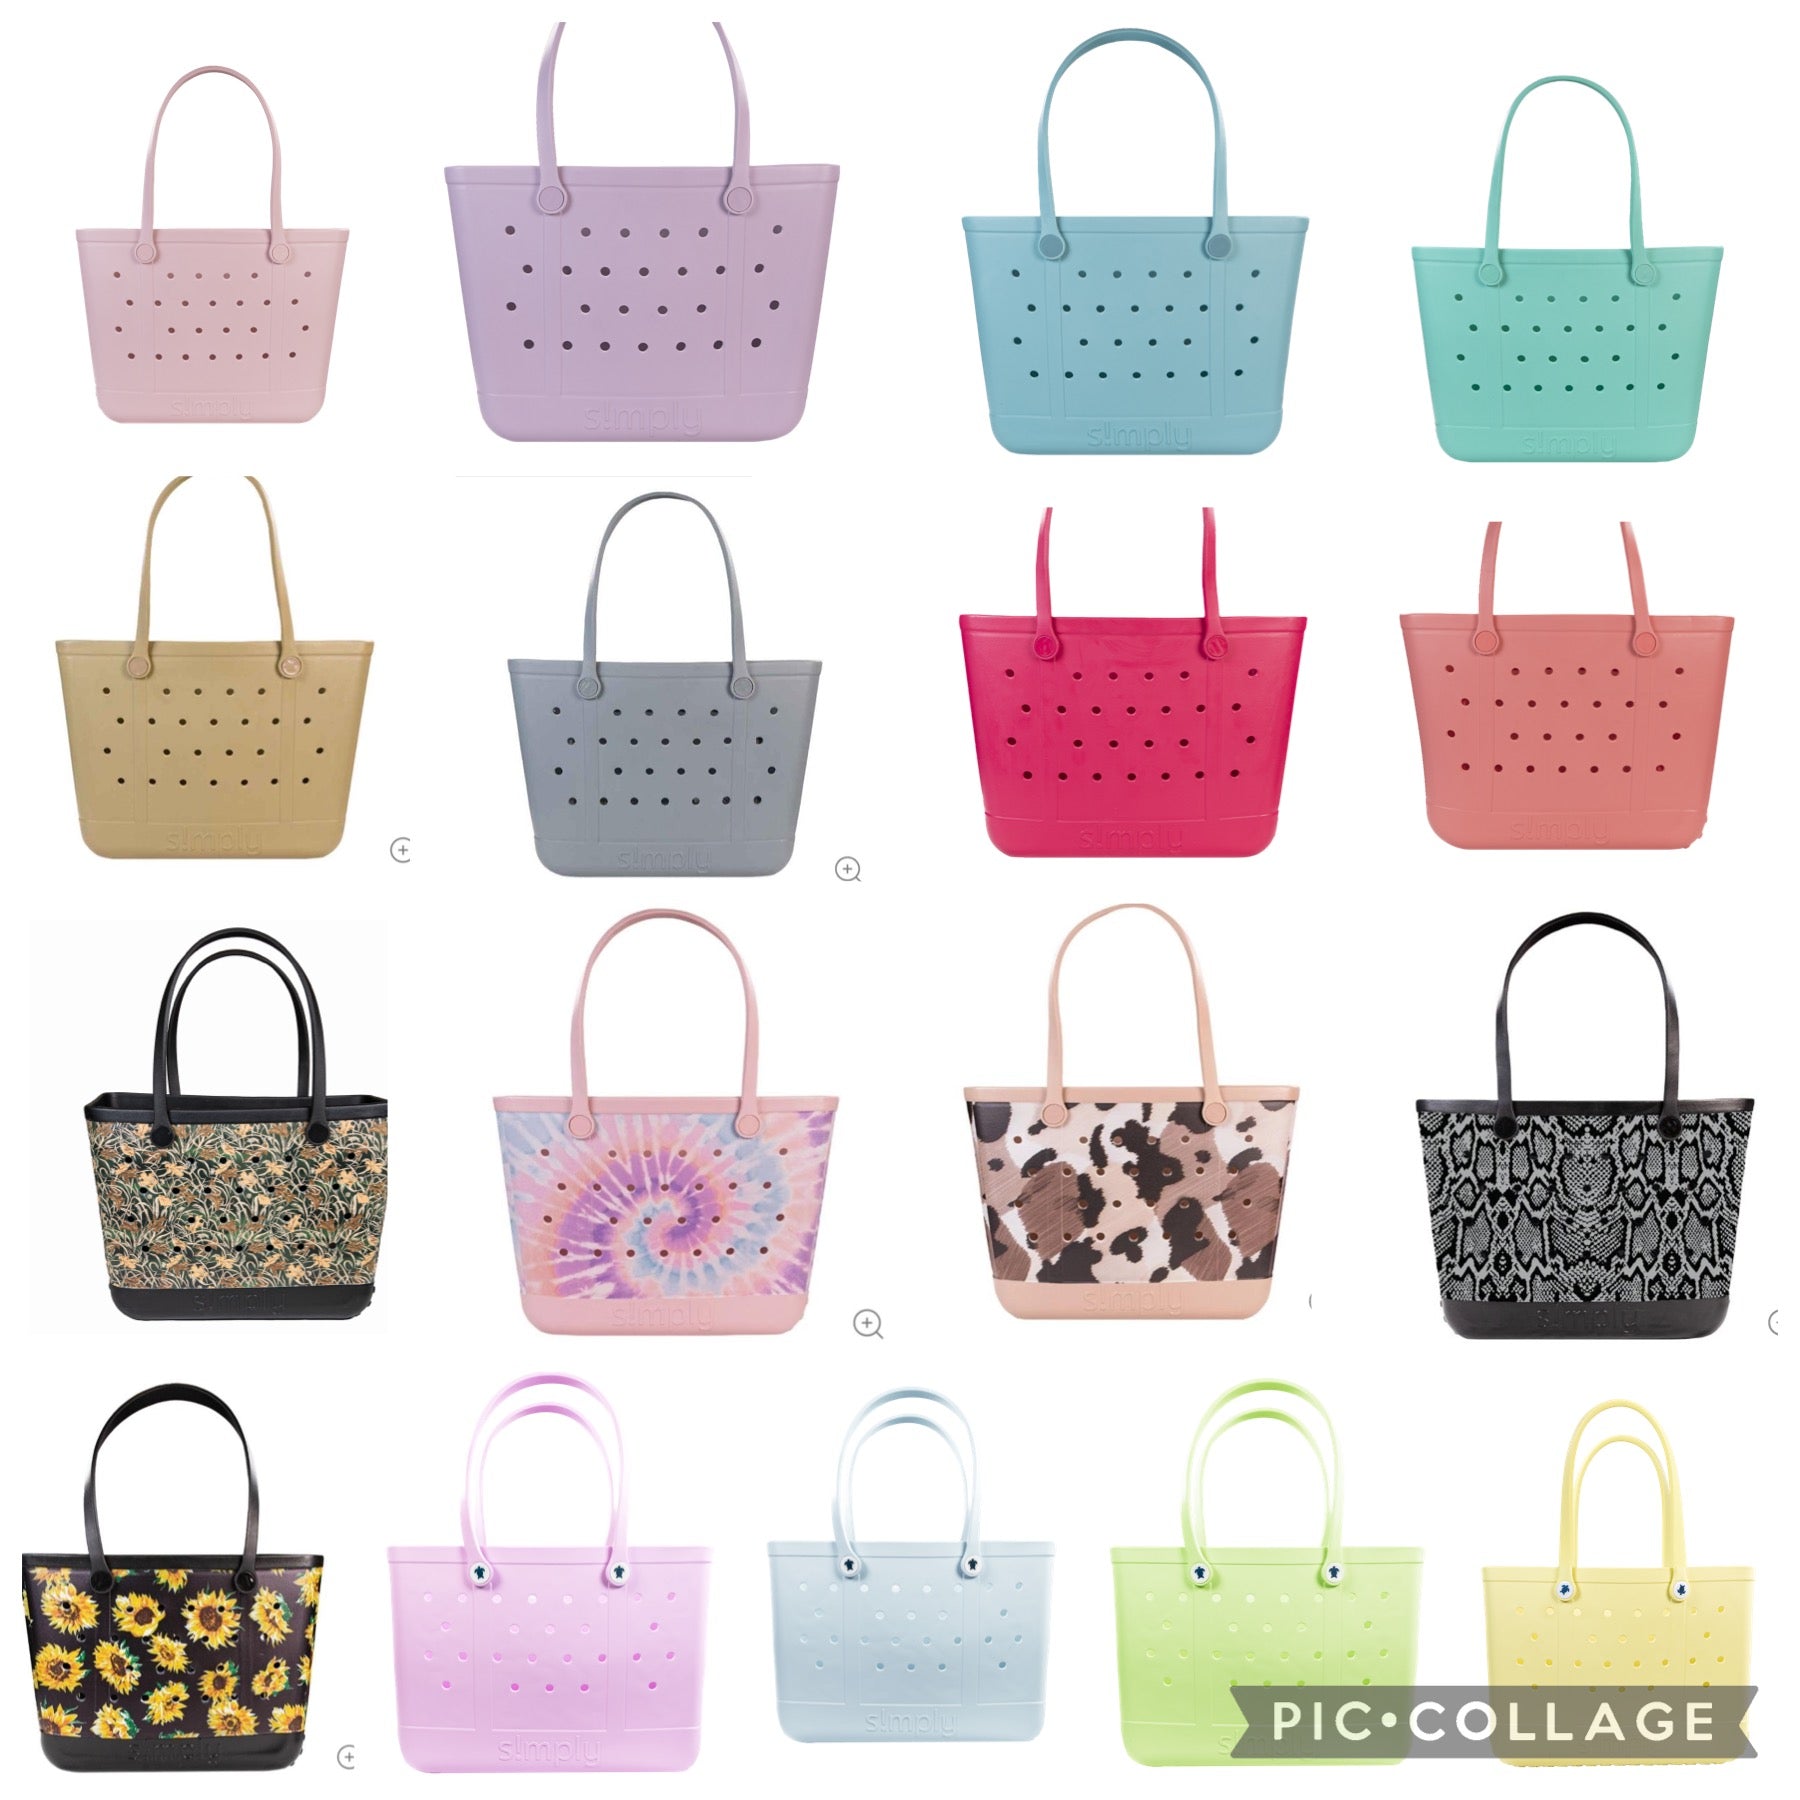 Simply Southern Simply Tote Large – Keffalas Designs